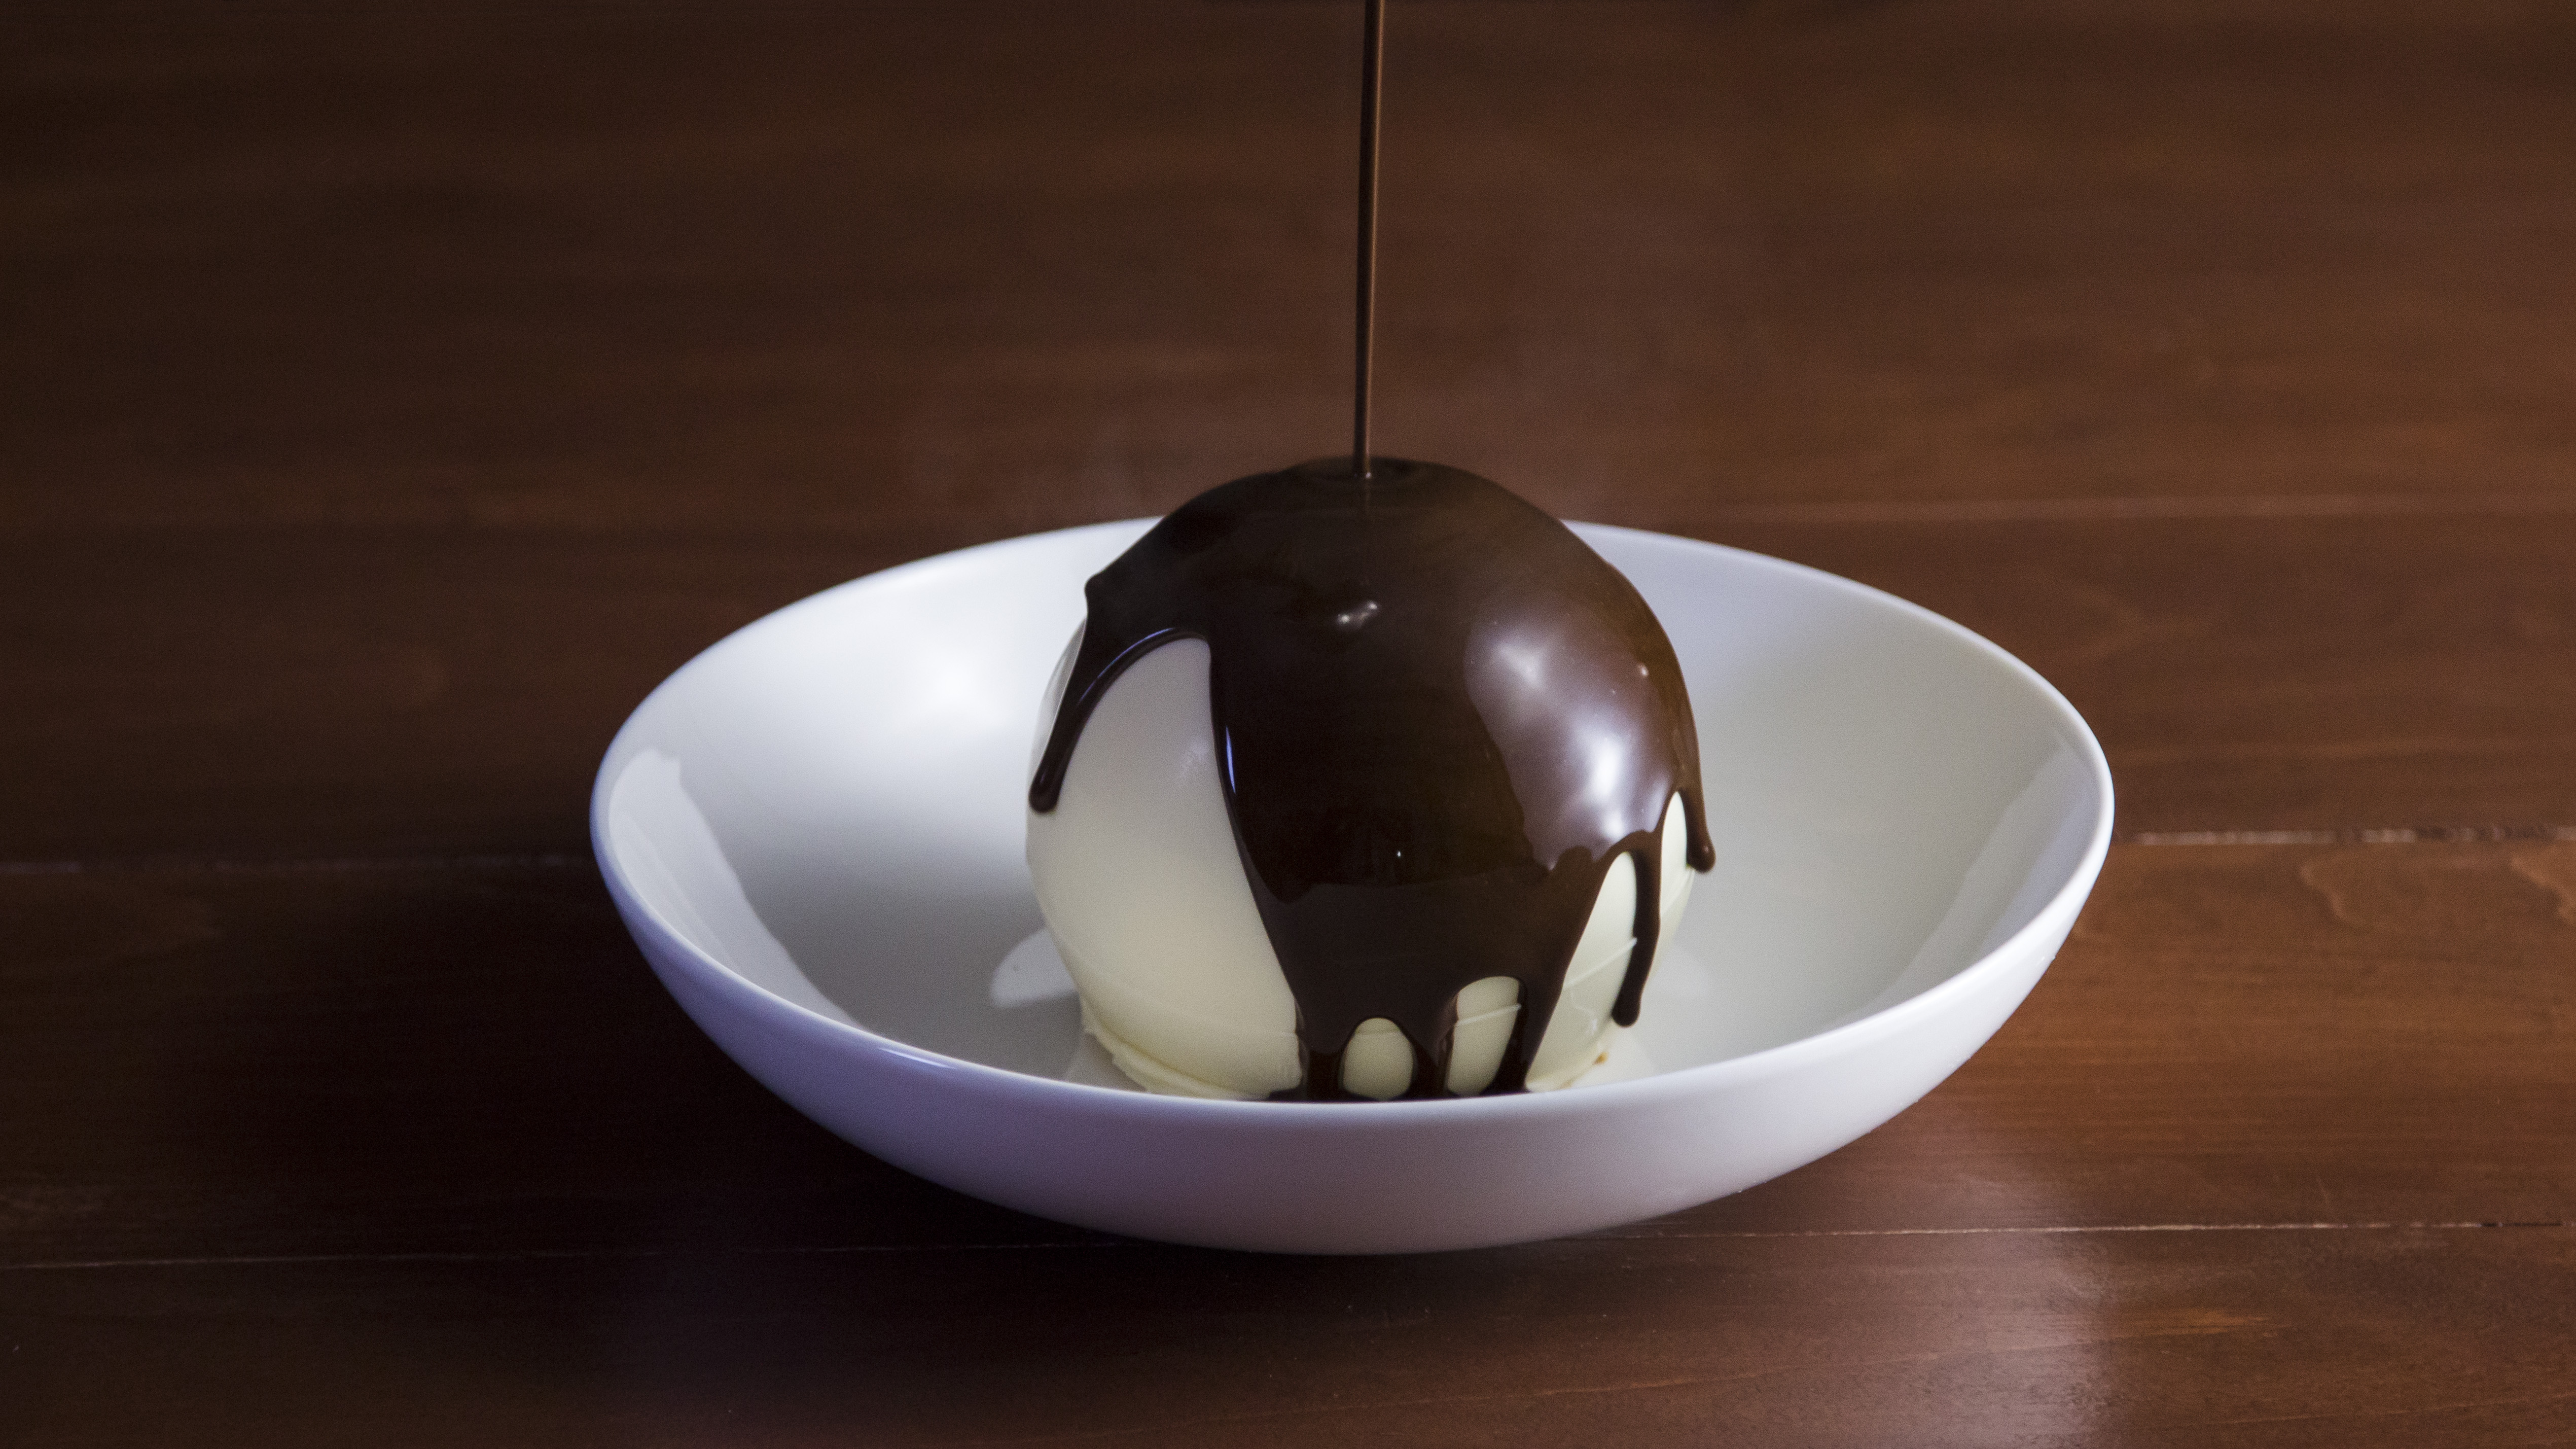 Melting White Chocolate Ball ~ Hungry AF | Tastemade